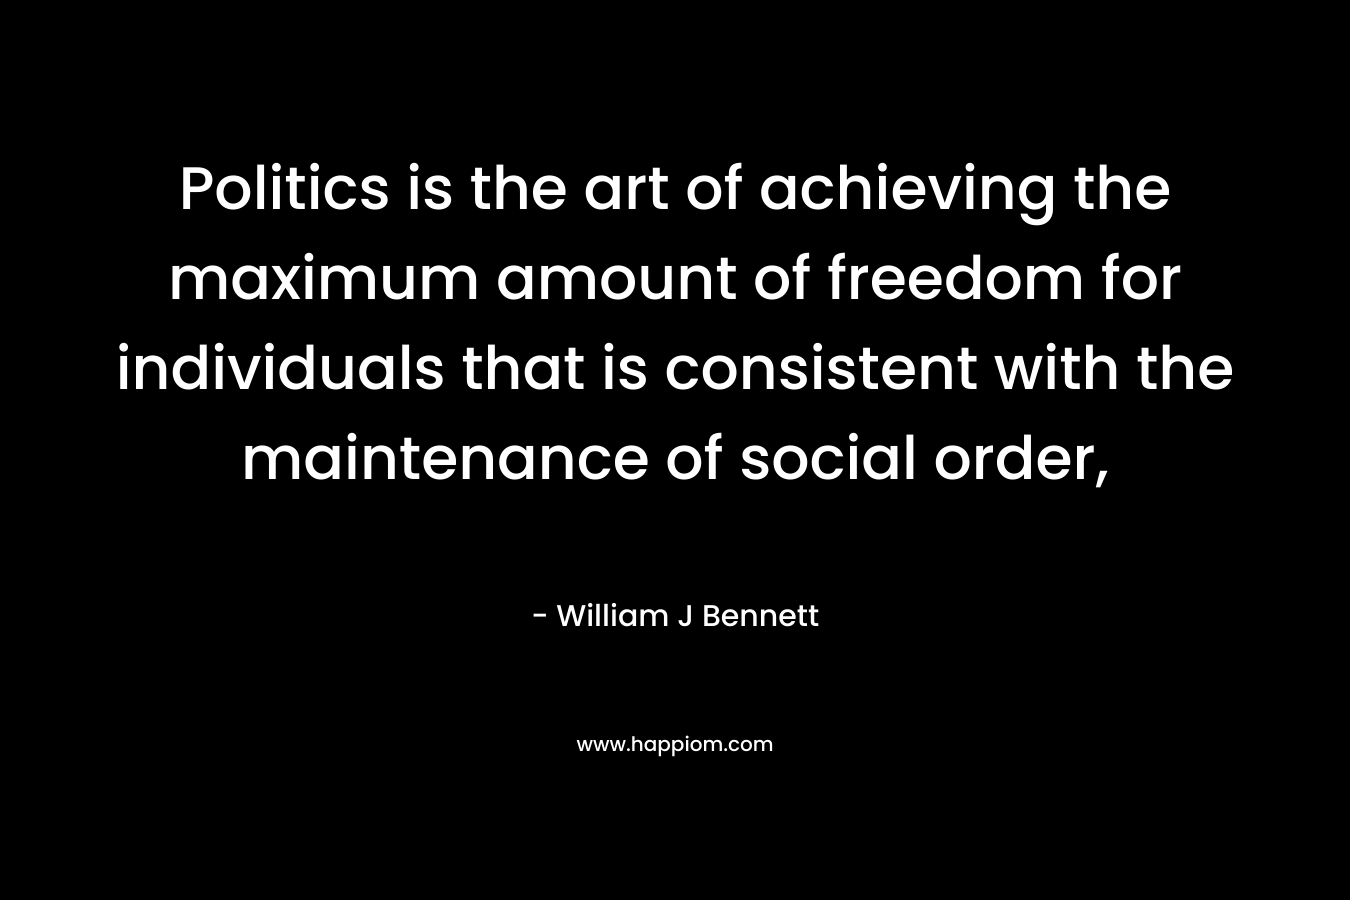 Politics is the art of achieving the maximum amount of freedom for individuals that is consistent with the maintenance of social order, – William J Bennett